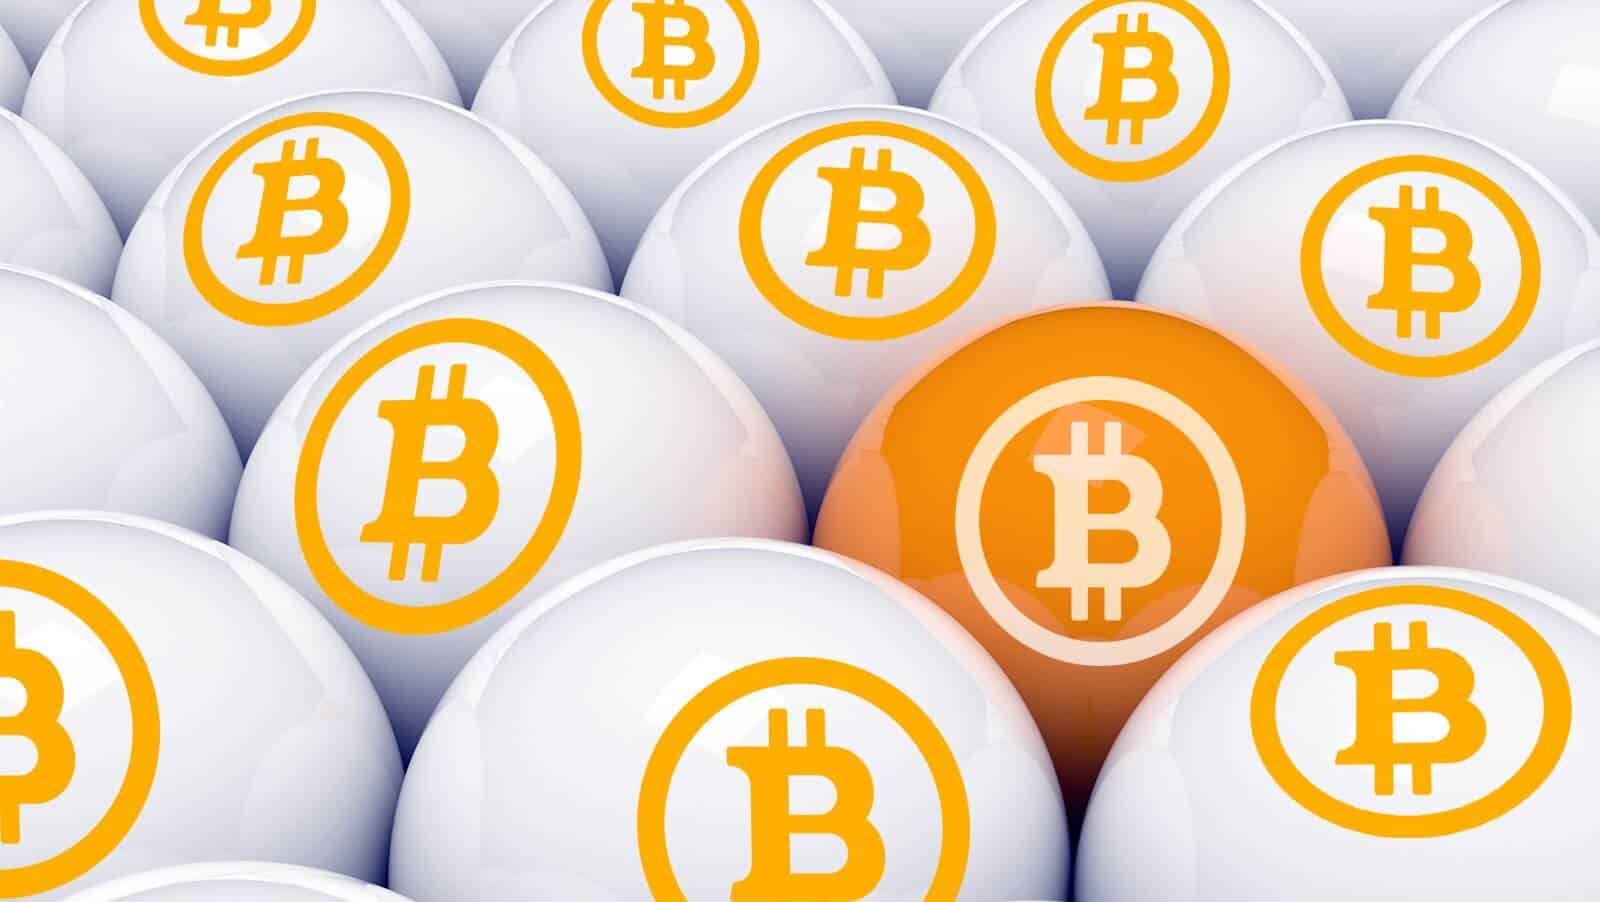 7 Ways To Keep Your Live Casino Bitcoin Growing Without Burning The Midnight Oil